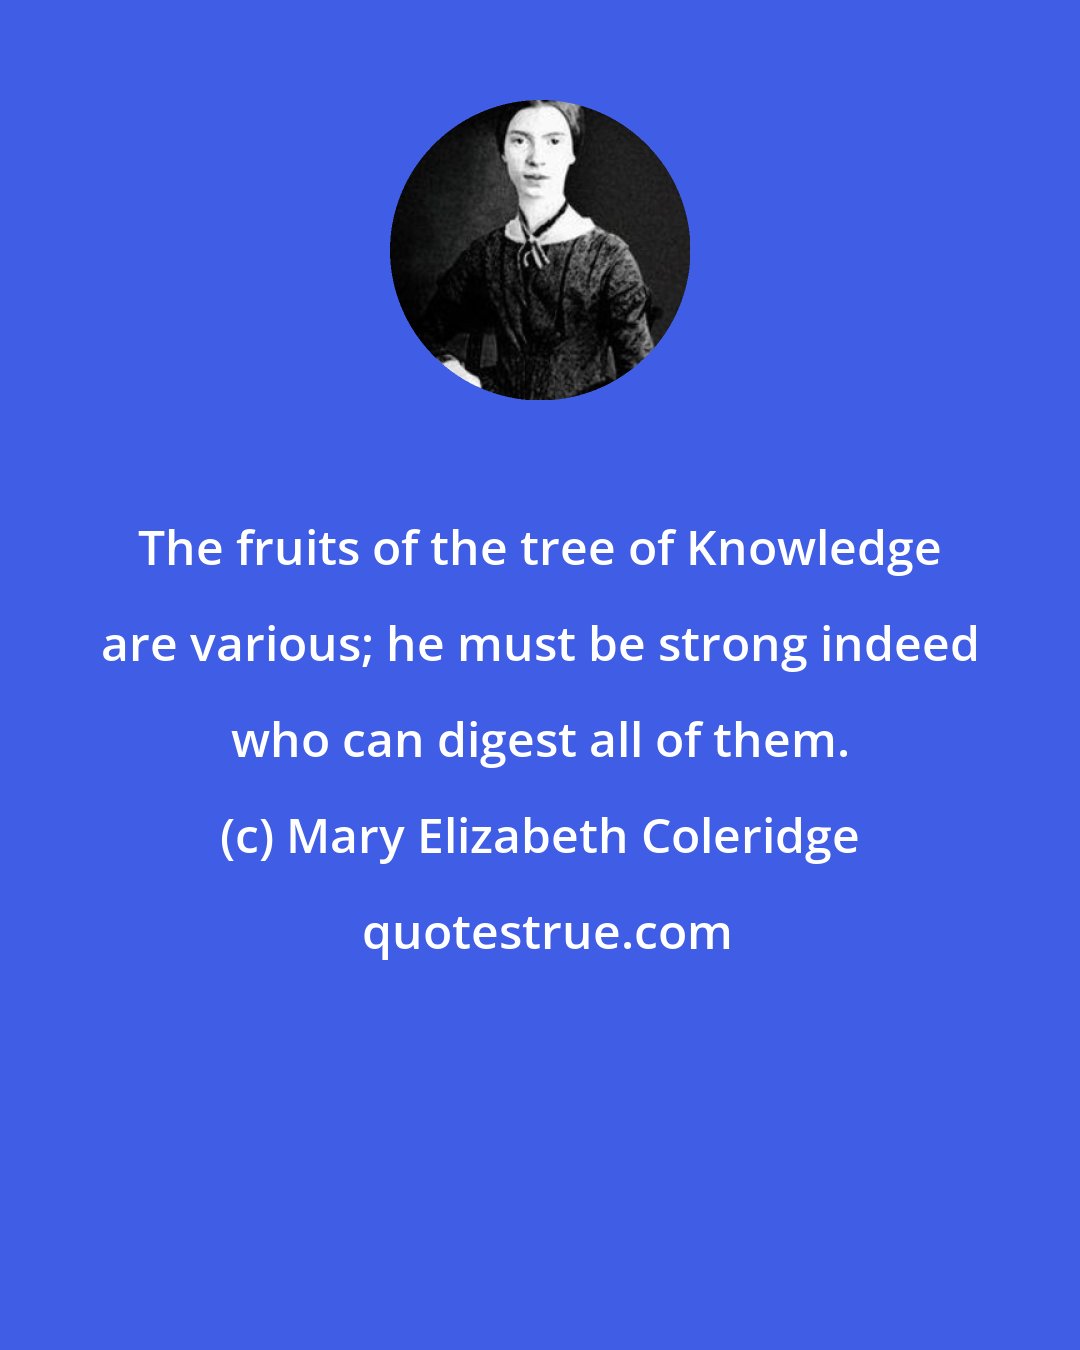 Mary Elizabeth Coleridge: The fruits of the tree of Knowledge are various; he must be strong indeed who can digest all of them.